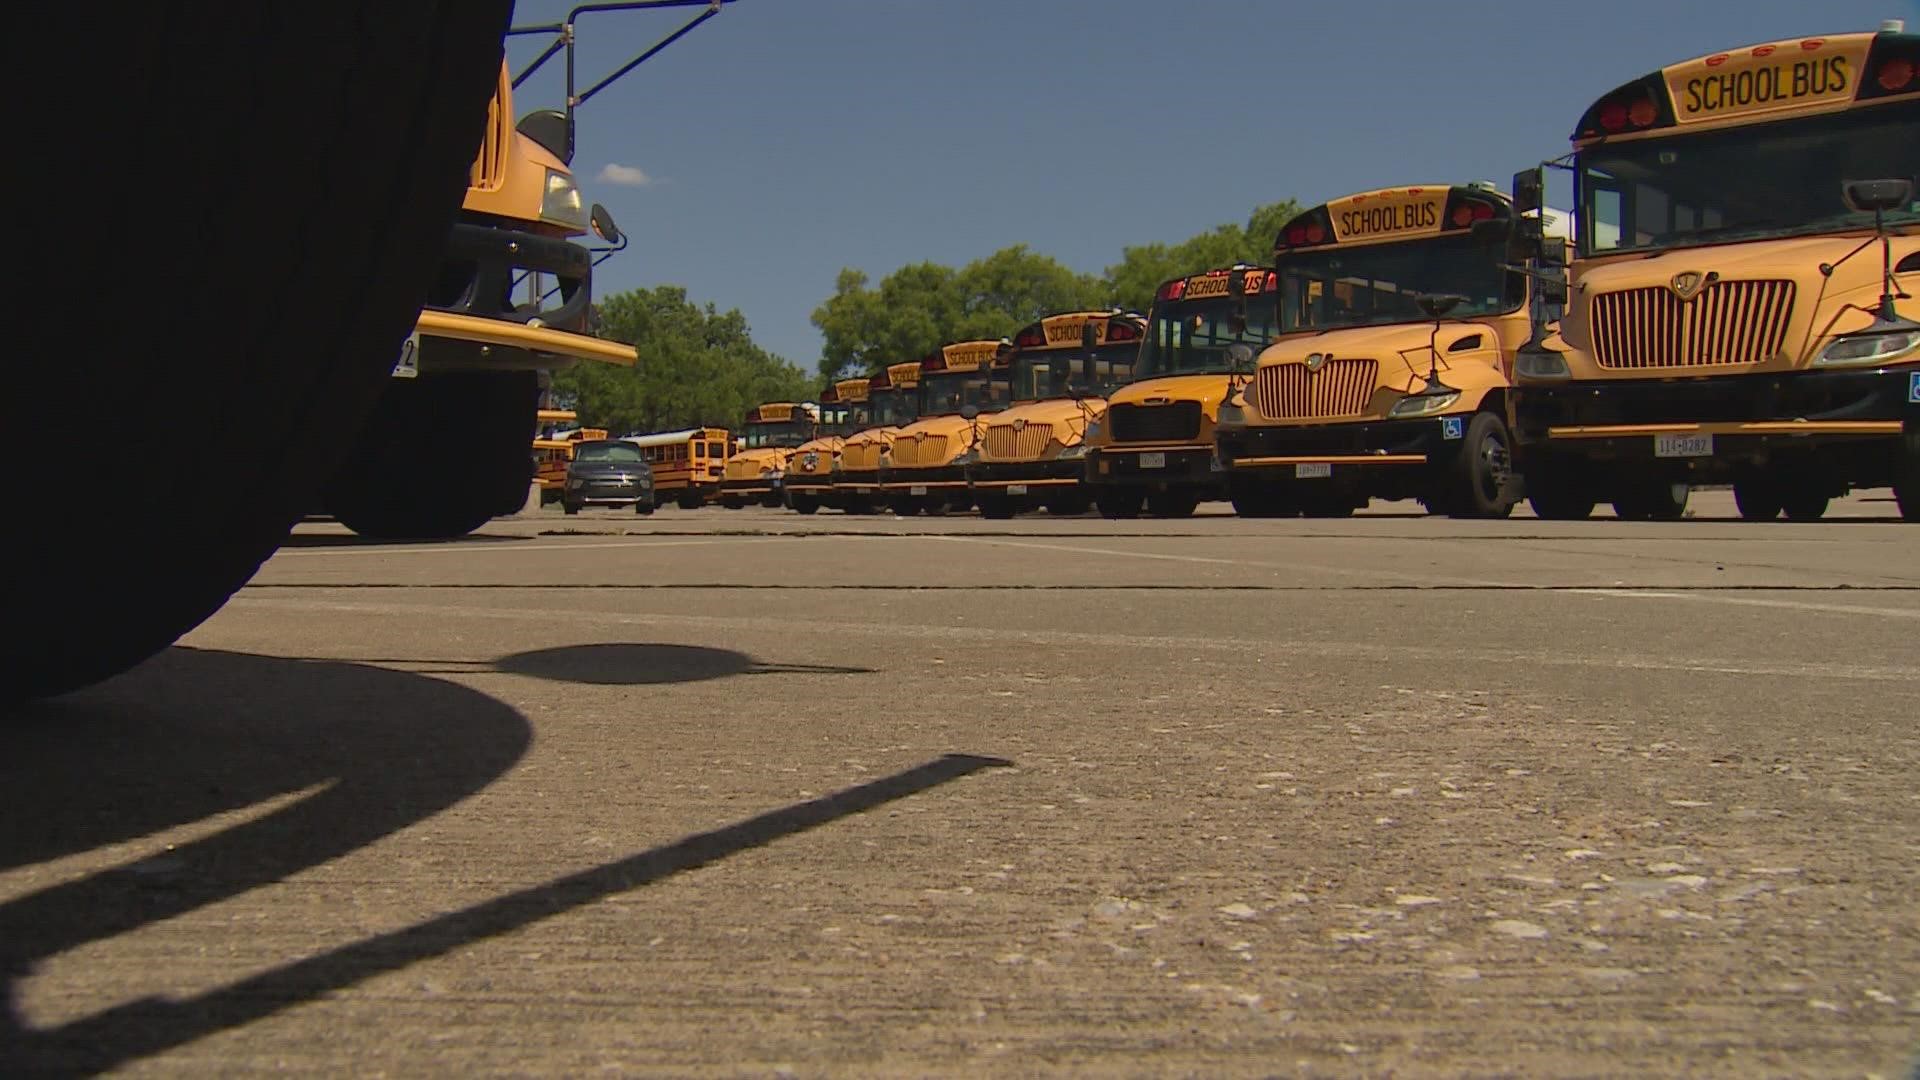 Frisco ISD, like many school districts around, is hoping to fill bus driver, crossing guard, and bus monitor positions.